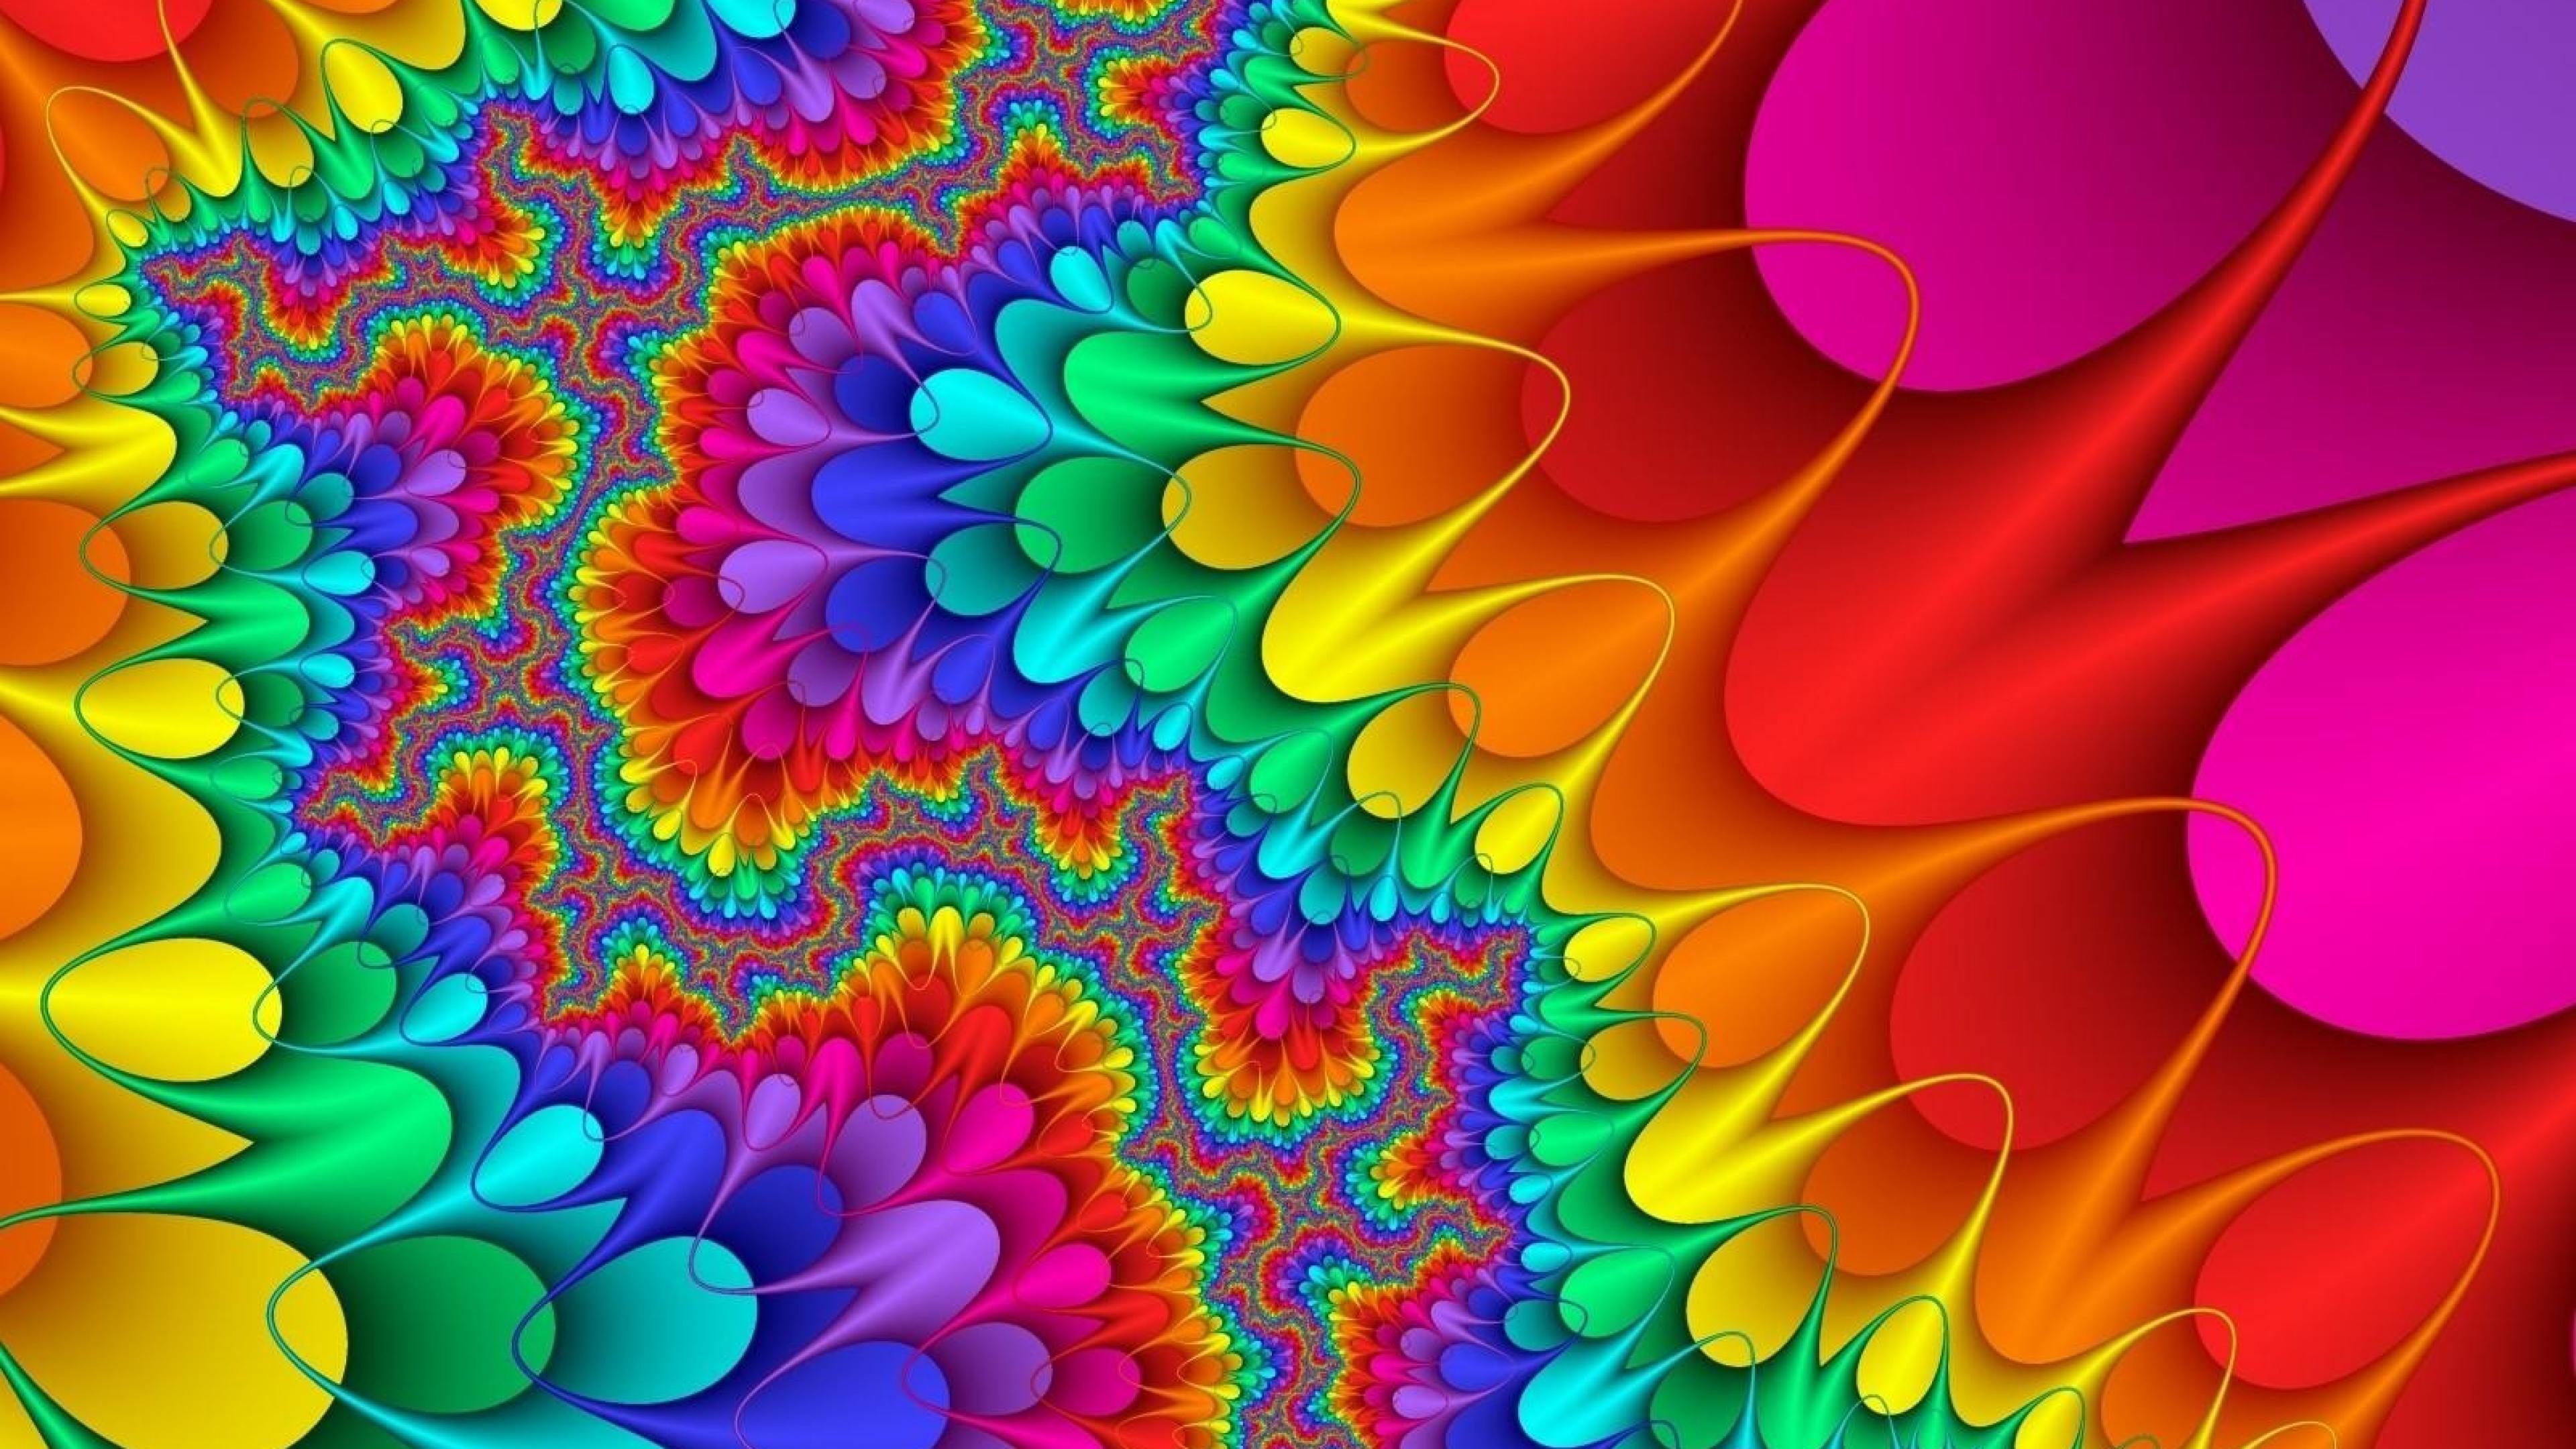 Wallpaper.wiki Abstract Colorful Widescreen 4K Resolution Image PIC